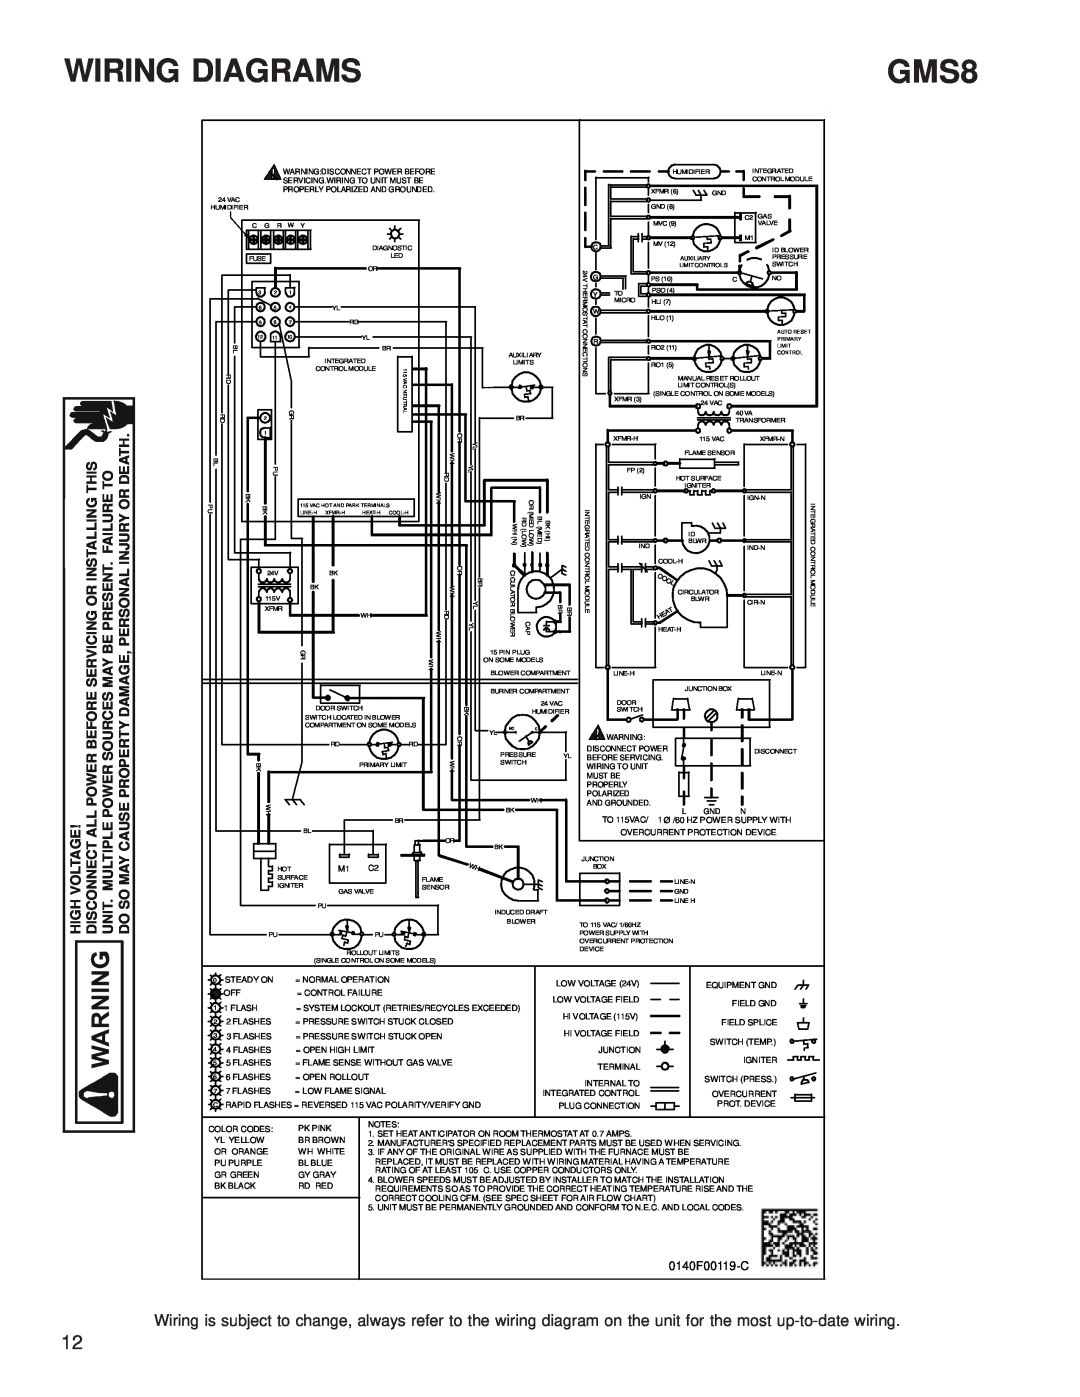 Goodman Mfg RT6621031r2 service manual Wiring Diagrams, GMS8, Installing This Failure To Injury Or Death, 0140F00119-C 